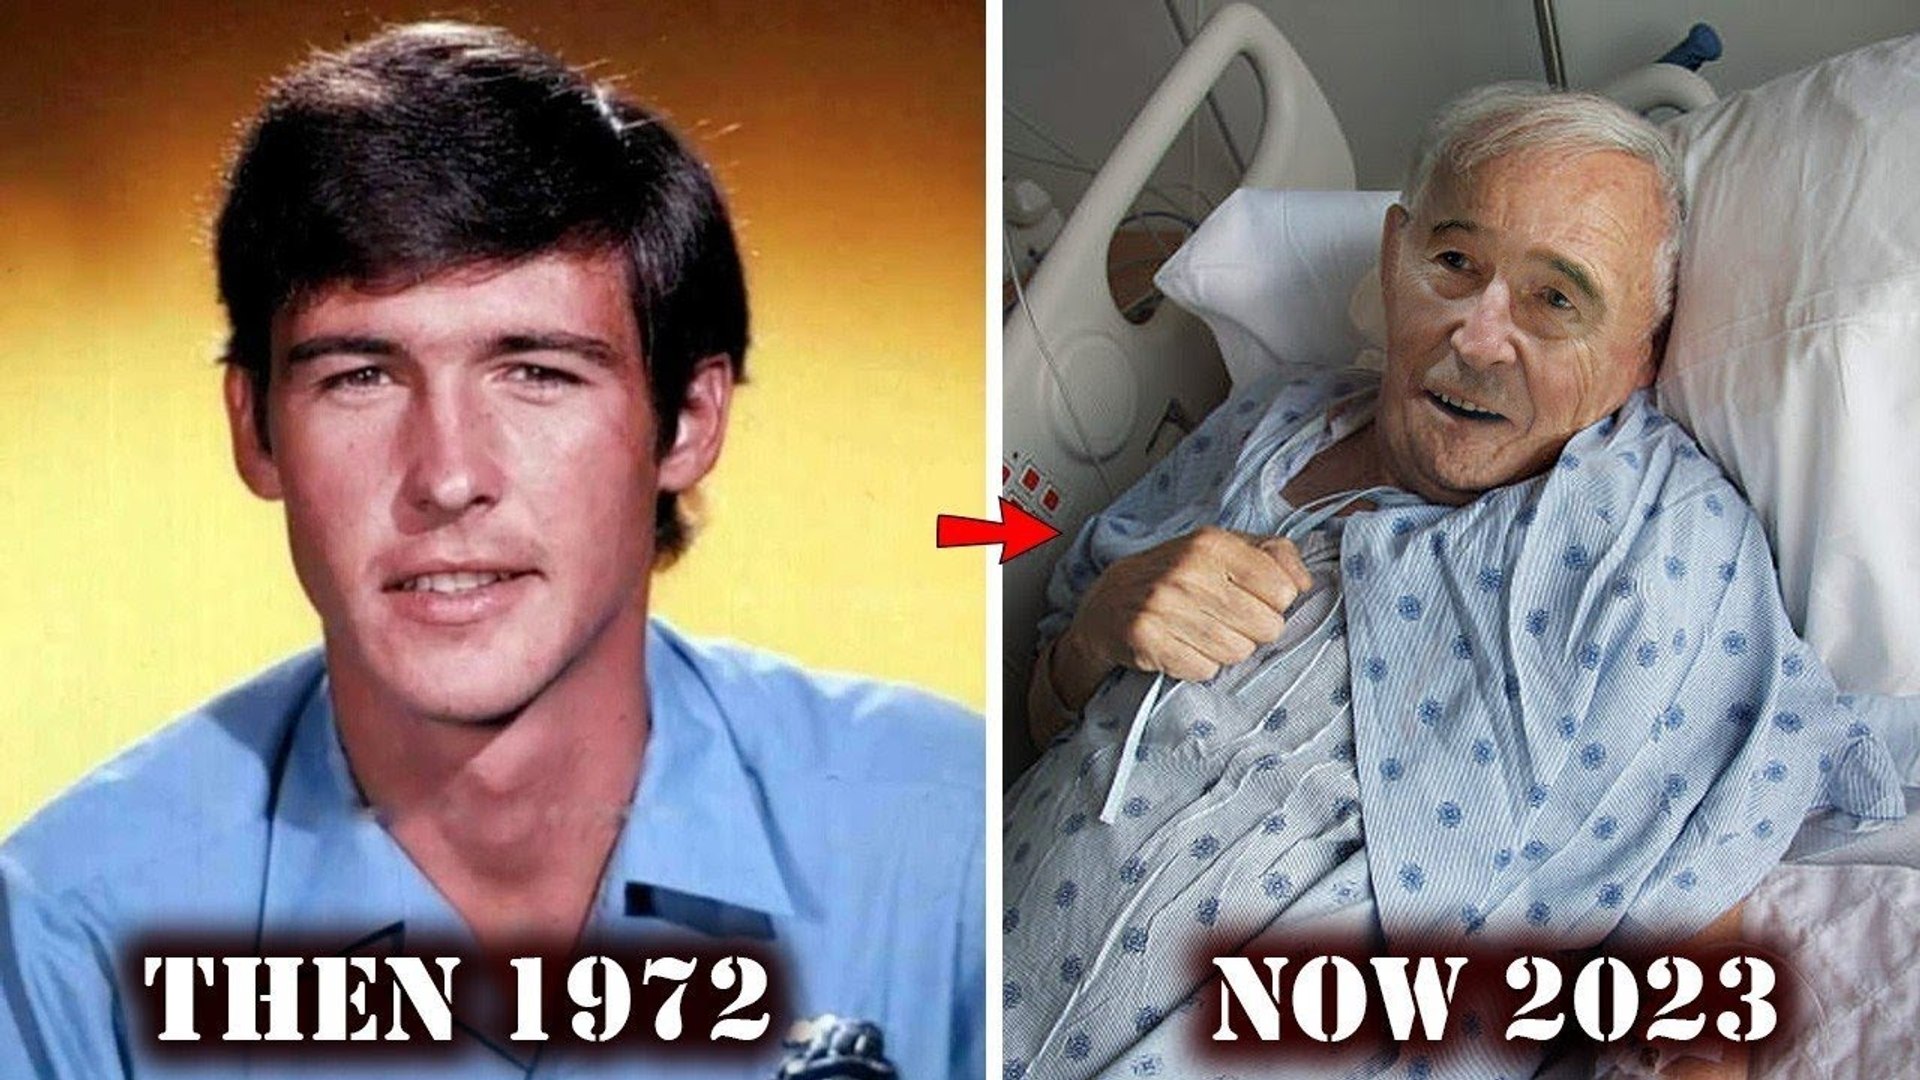 See the 'Dukes of Hazzard' Cast Then and Now: Photos